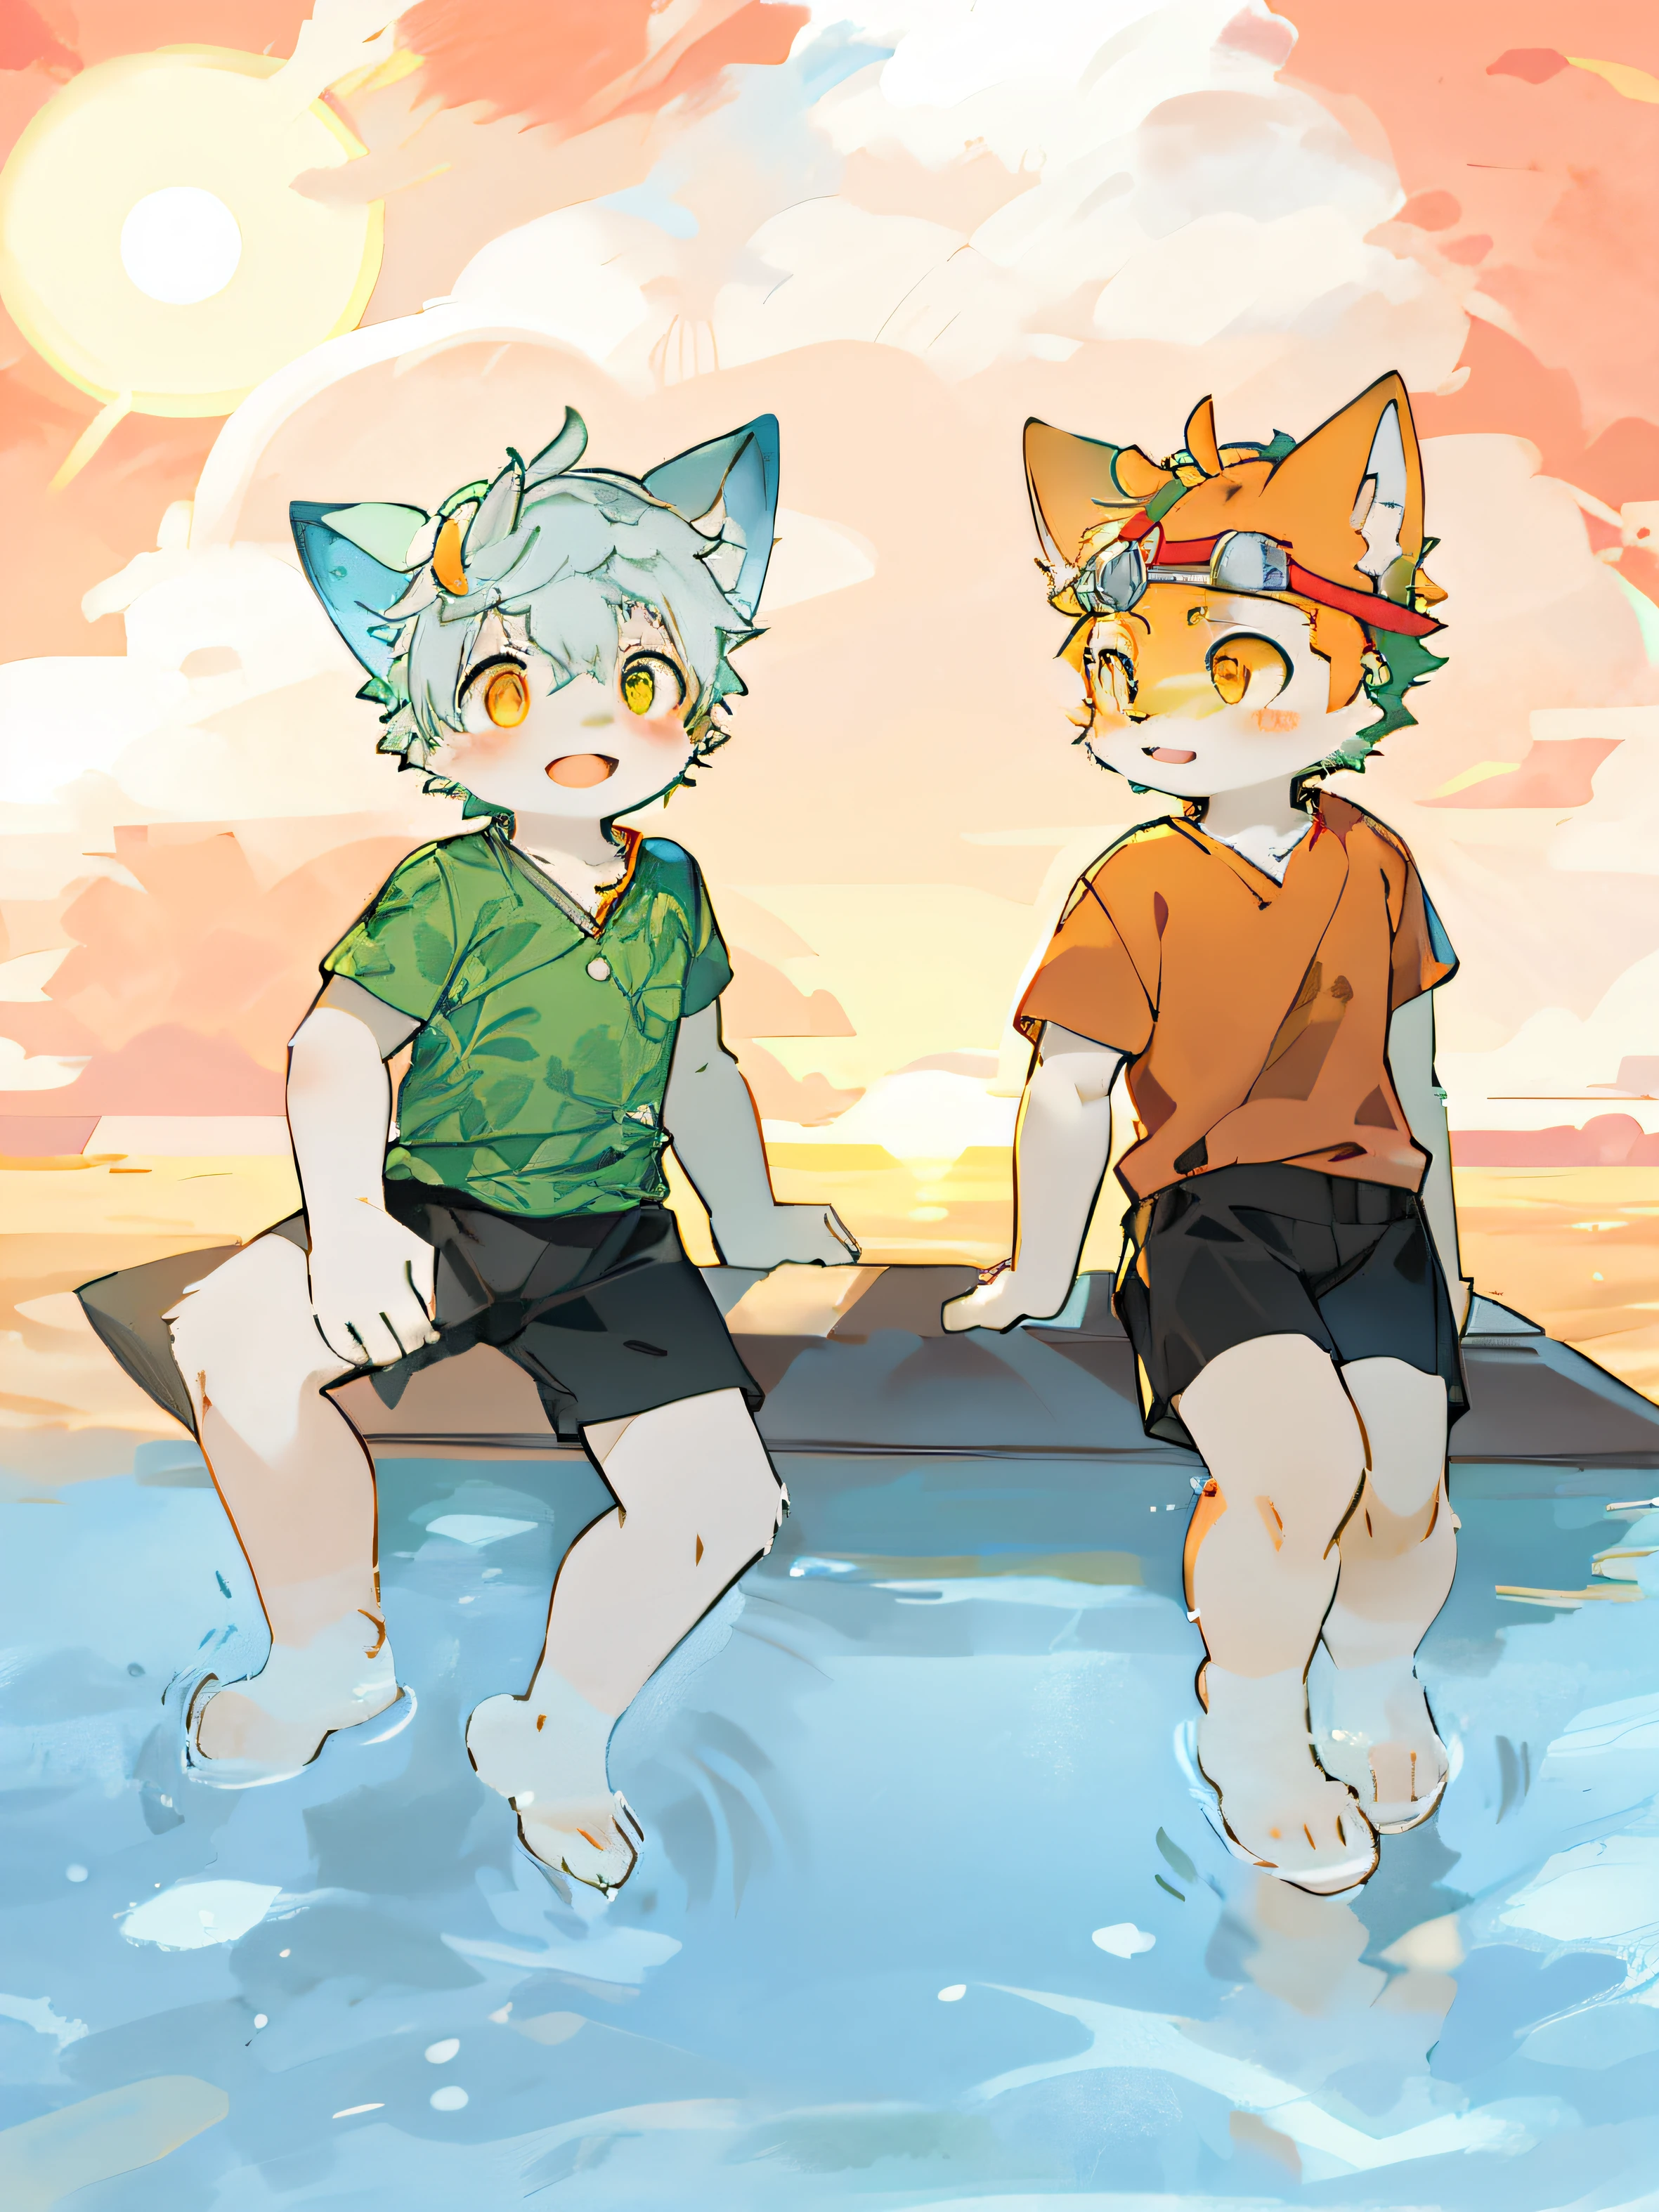 There are two cats sitting on the boat in the water, dusk, sun, sand, (the cat on the left has blue ears, green leaf clothes, black panties, yellow eyes, red eyebrows, bangs and hair), (the one on the right has only yellow ears, wearing orange clothes, blue eyes, and an adventure mirror on his head), water's edge, two beast boys, clear eyes, masterpiece, masterpiece